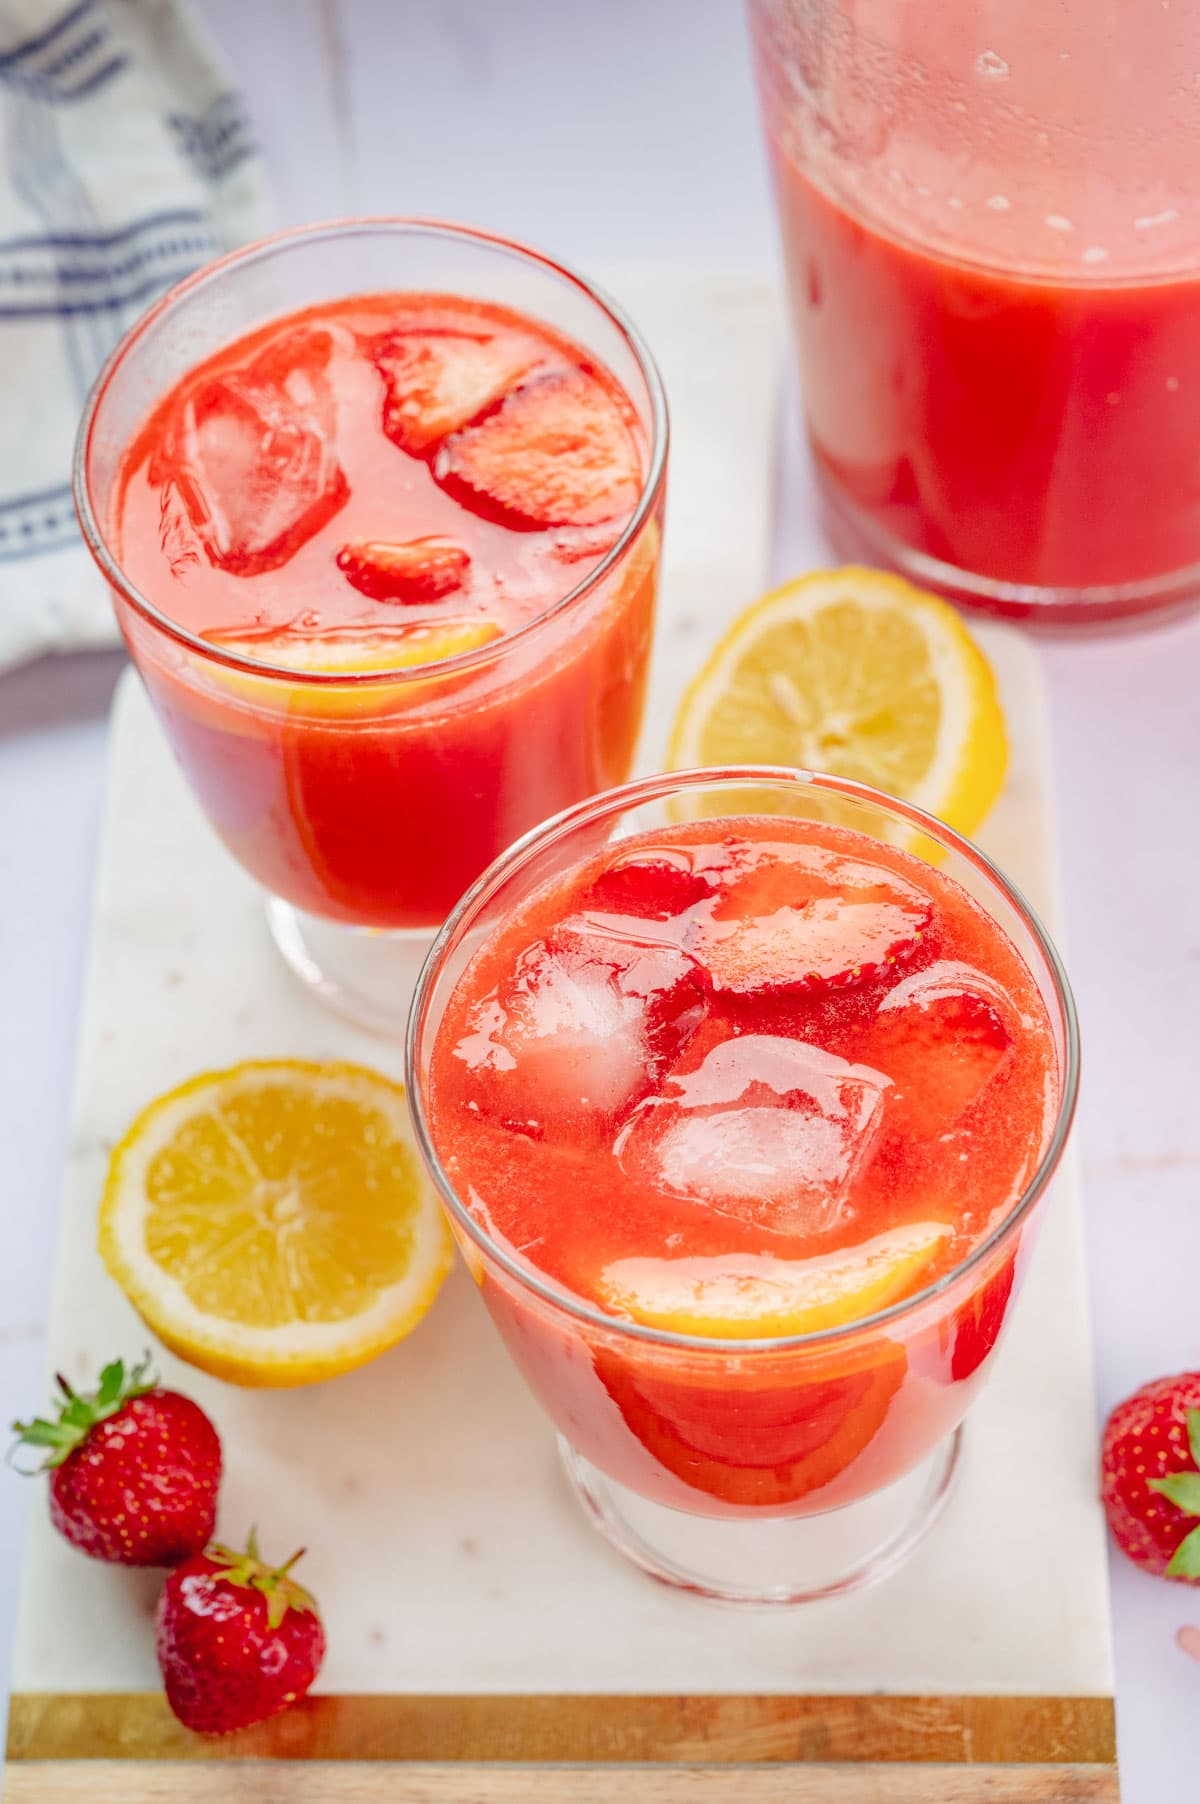 Two glasses with strawberry lemonade and ice cubes. Strawberries and lemons in the background.